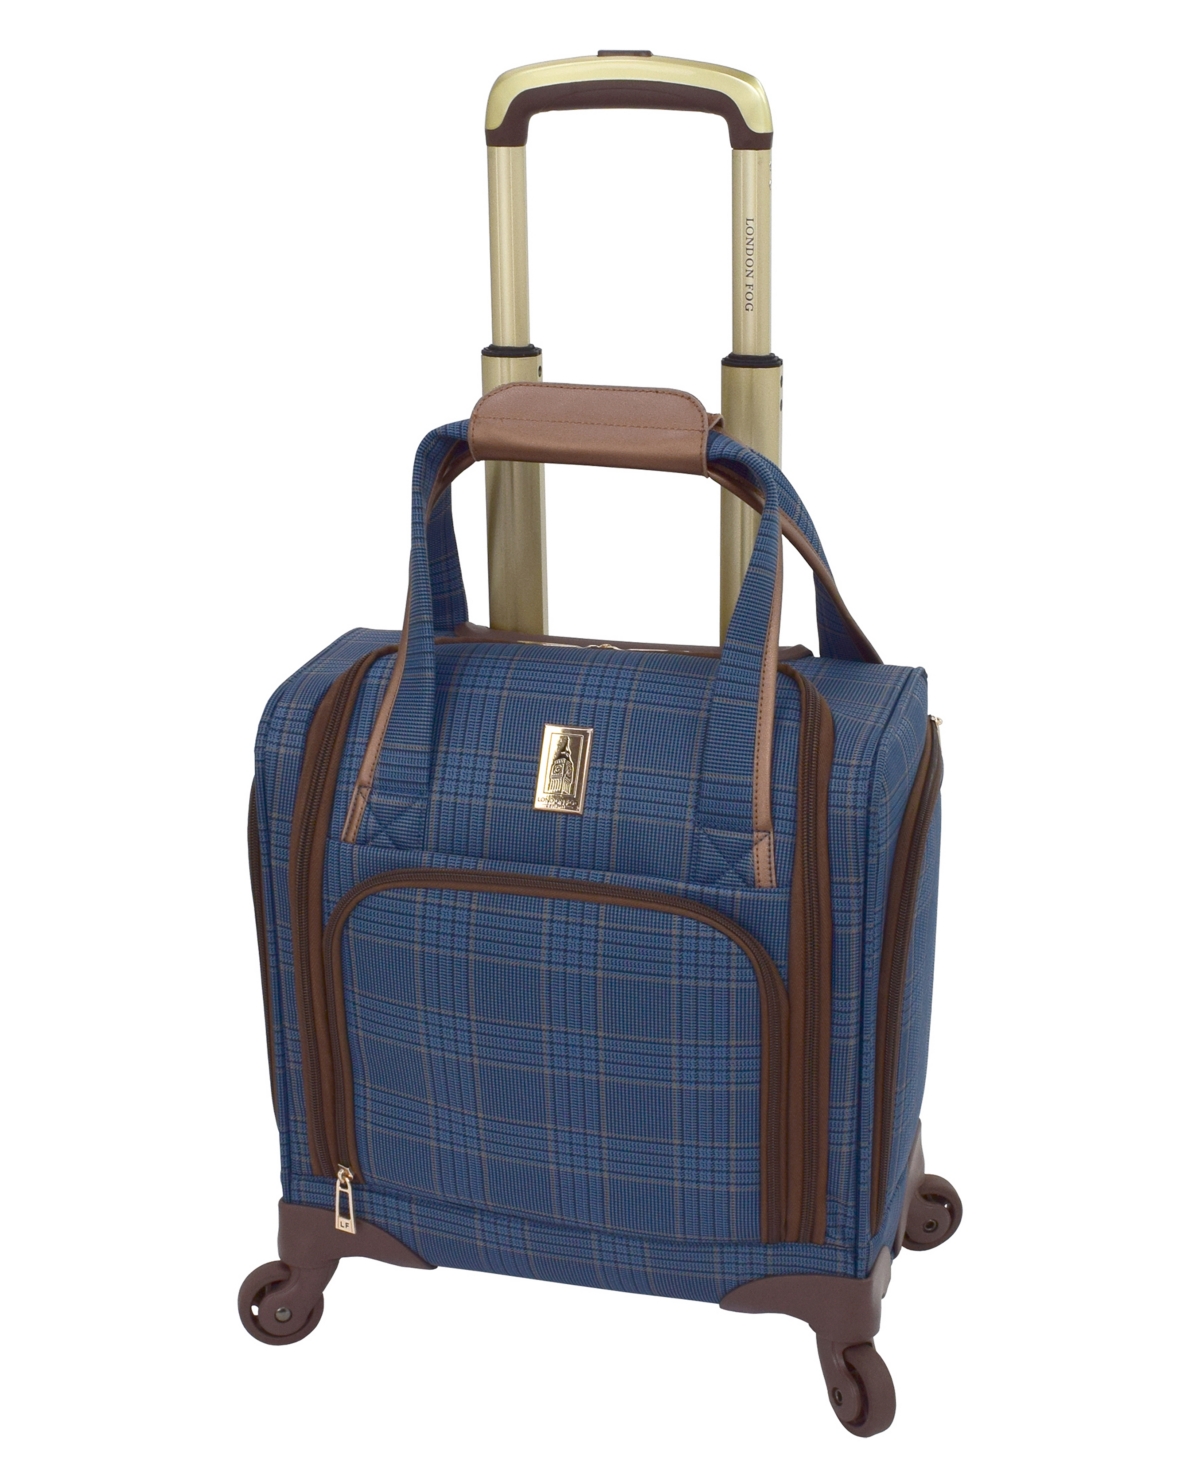 Brentwood Iii 15" 4 Wheel Under The Seat Bag, Created for Macy's - Navy, Bronze